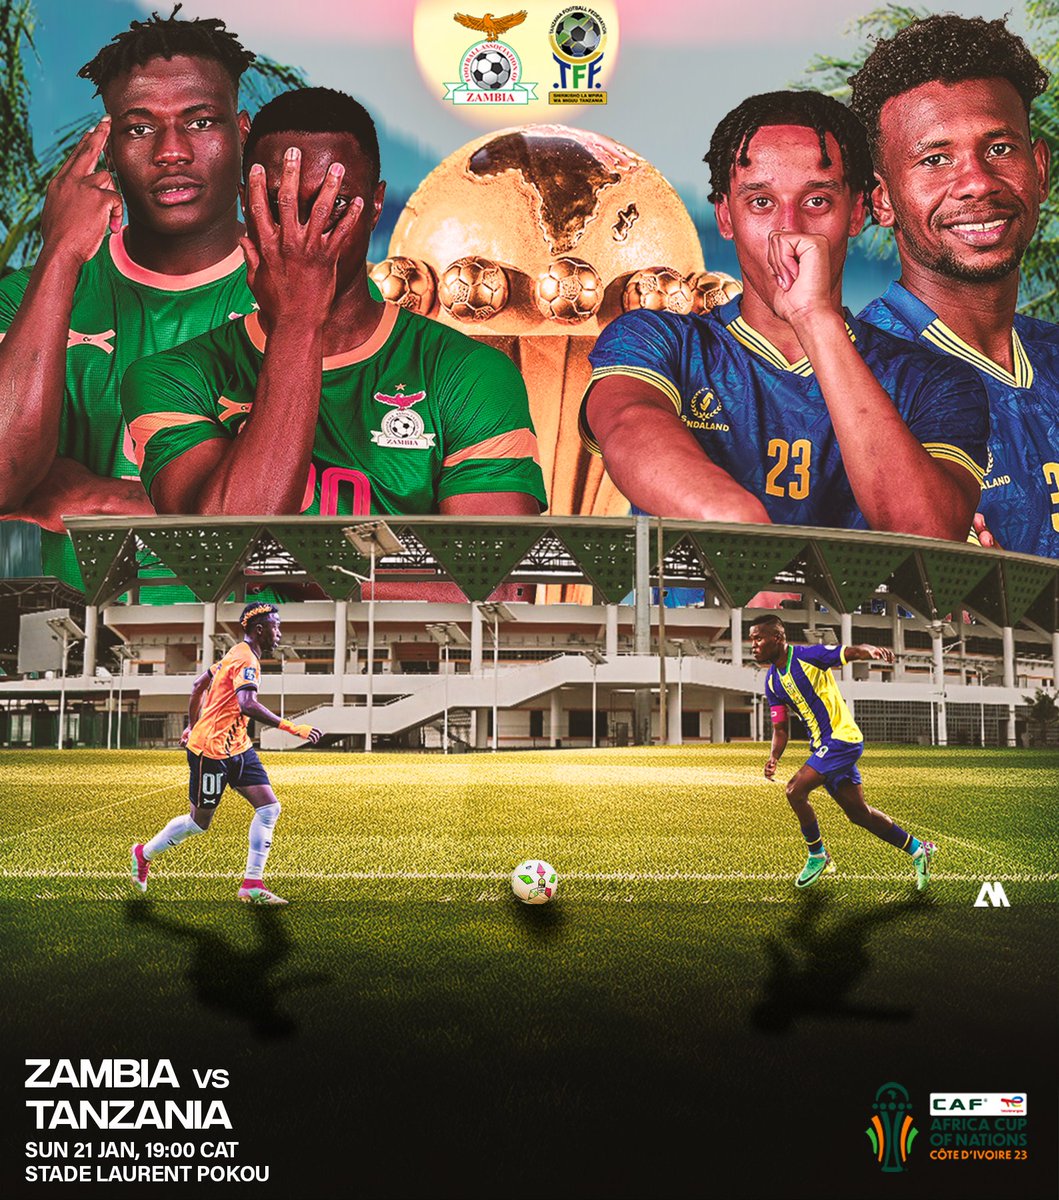 #ZedX family, its Matchday!!!🇿🇲💚
Let's go Chipolopolo, Let's go Zambia 💚
I made this artwork in support of our boys🔥🔥🔥
#WeAreChipolopolo #TotalEnergiesAFCON2023 #AFCON2023 #Zambia